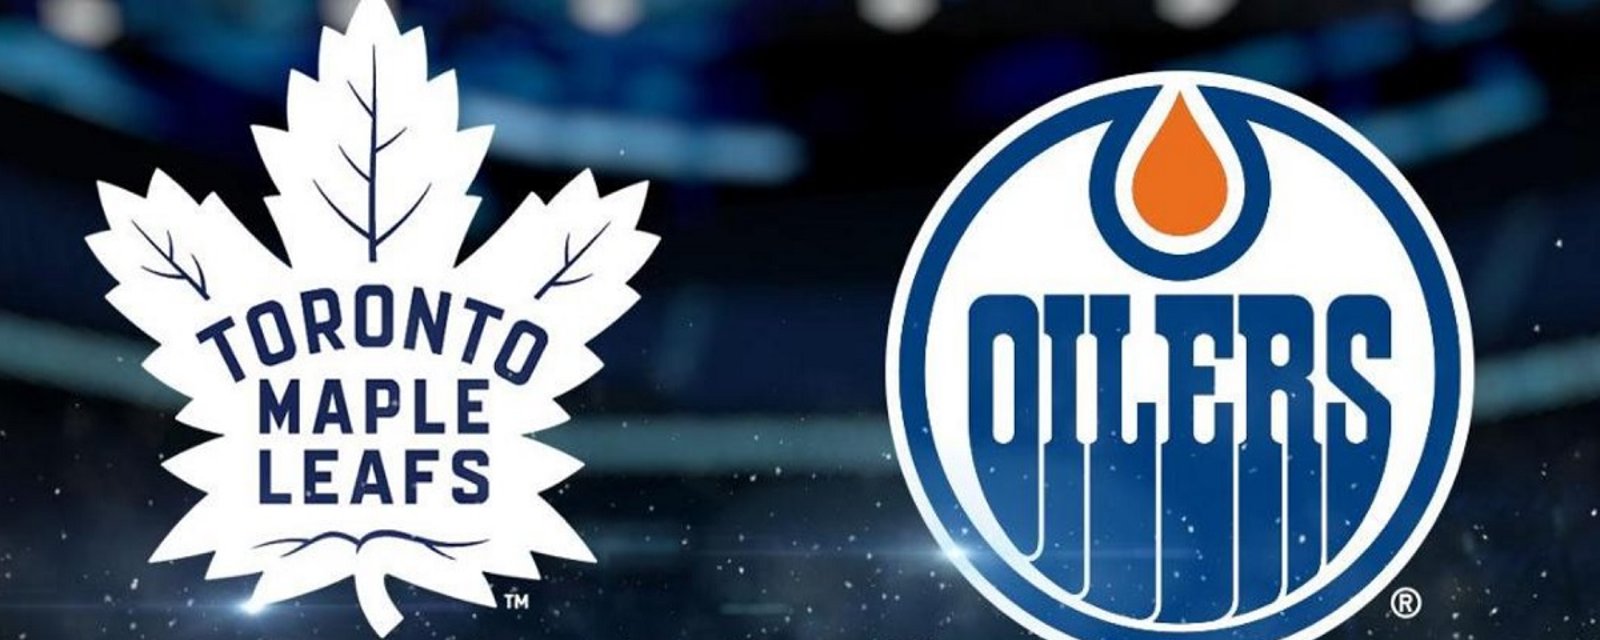 Rumors of a blockbuster trade between the Oilers and Maple Leafs. 